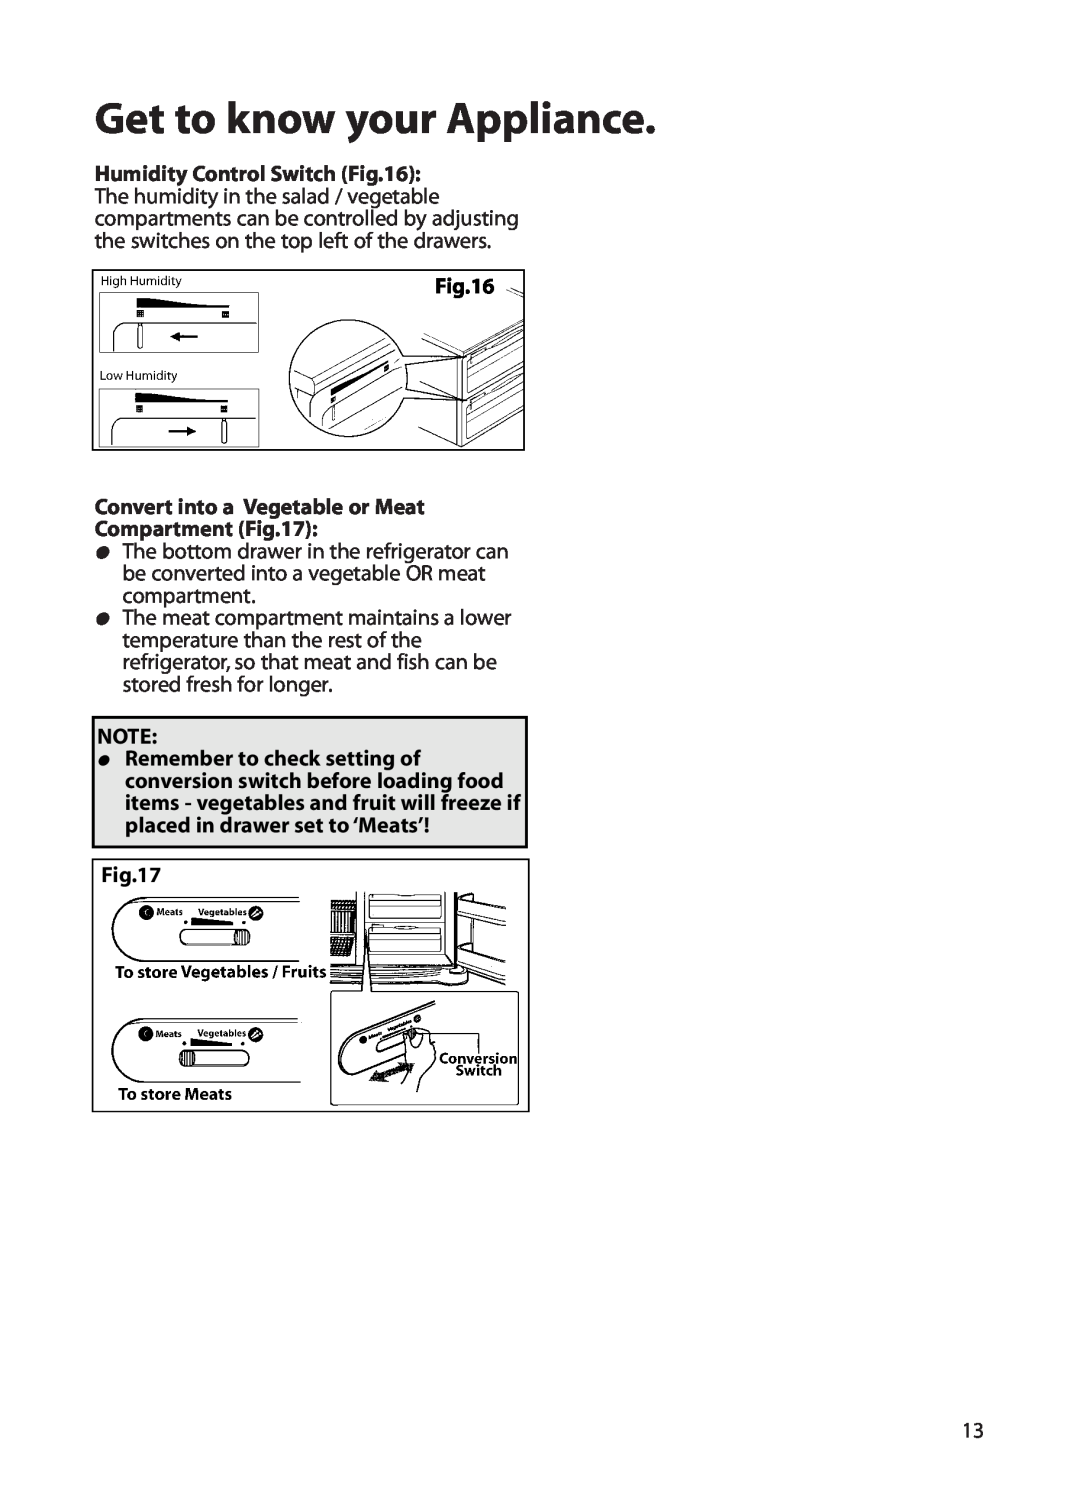 Hotpoint FFU00 manual Get to know your Appliance, Convert into a Vegetable or Meat Compartment 